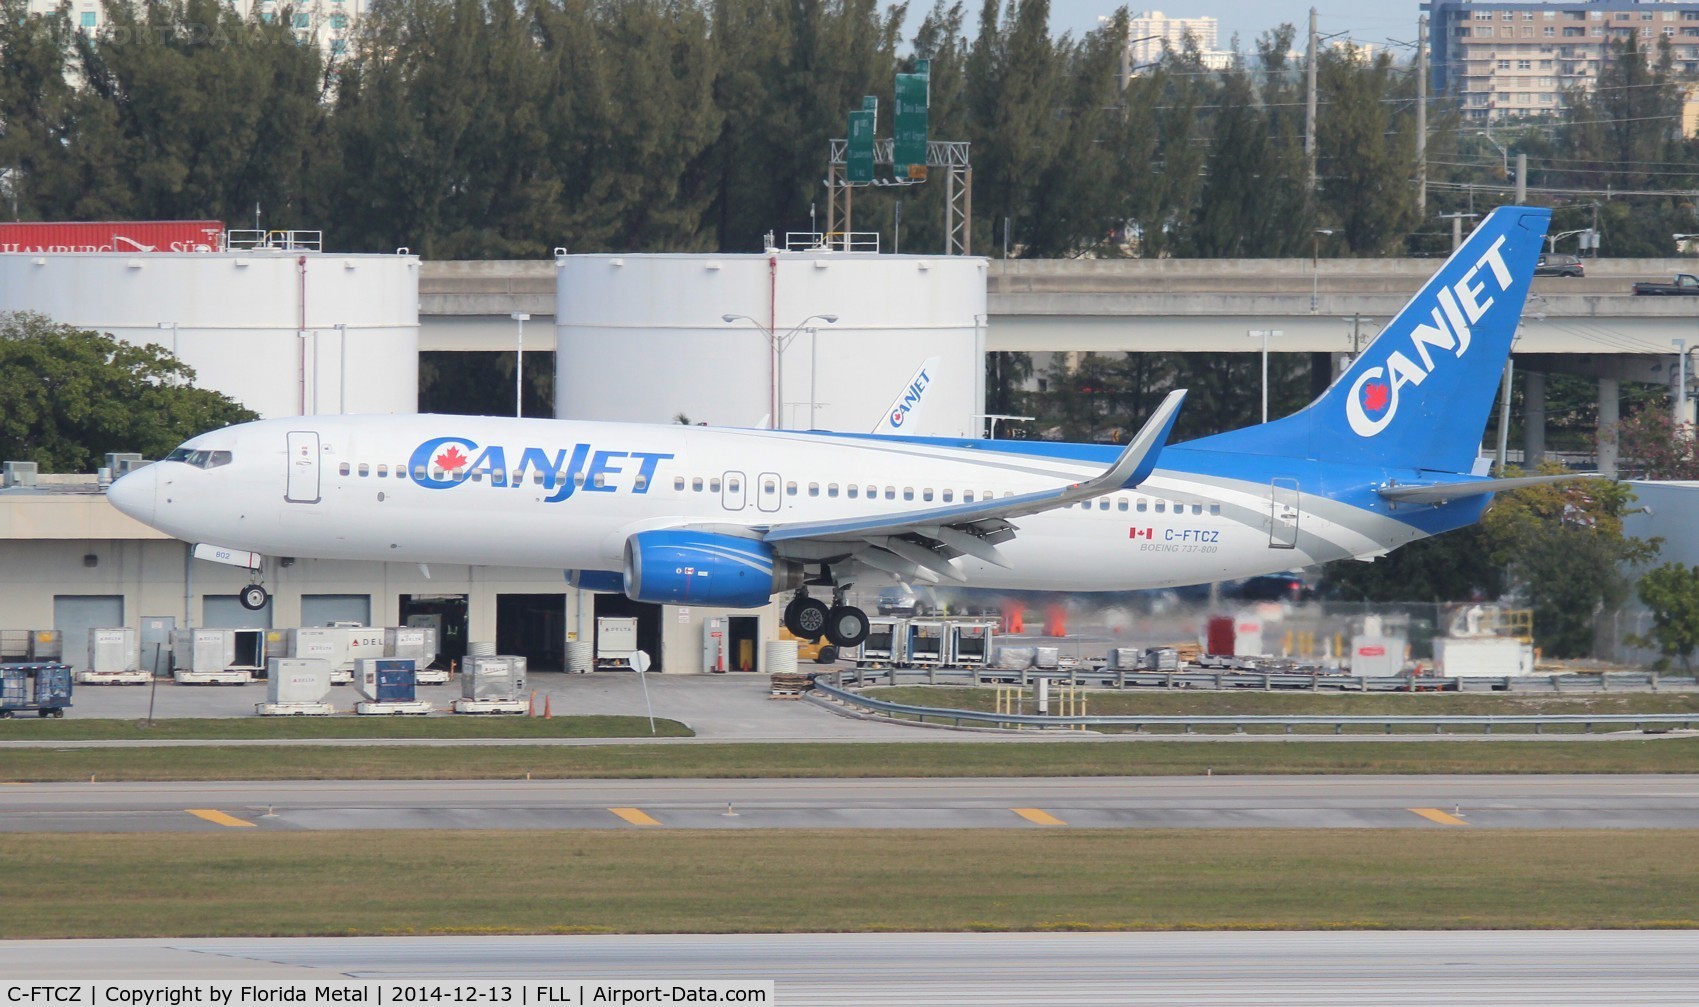 C-FTCZ, 2000 Boeing 737-8AS C/N 29923, Canjet